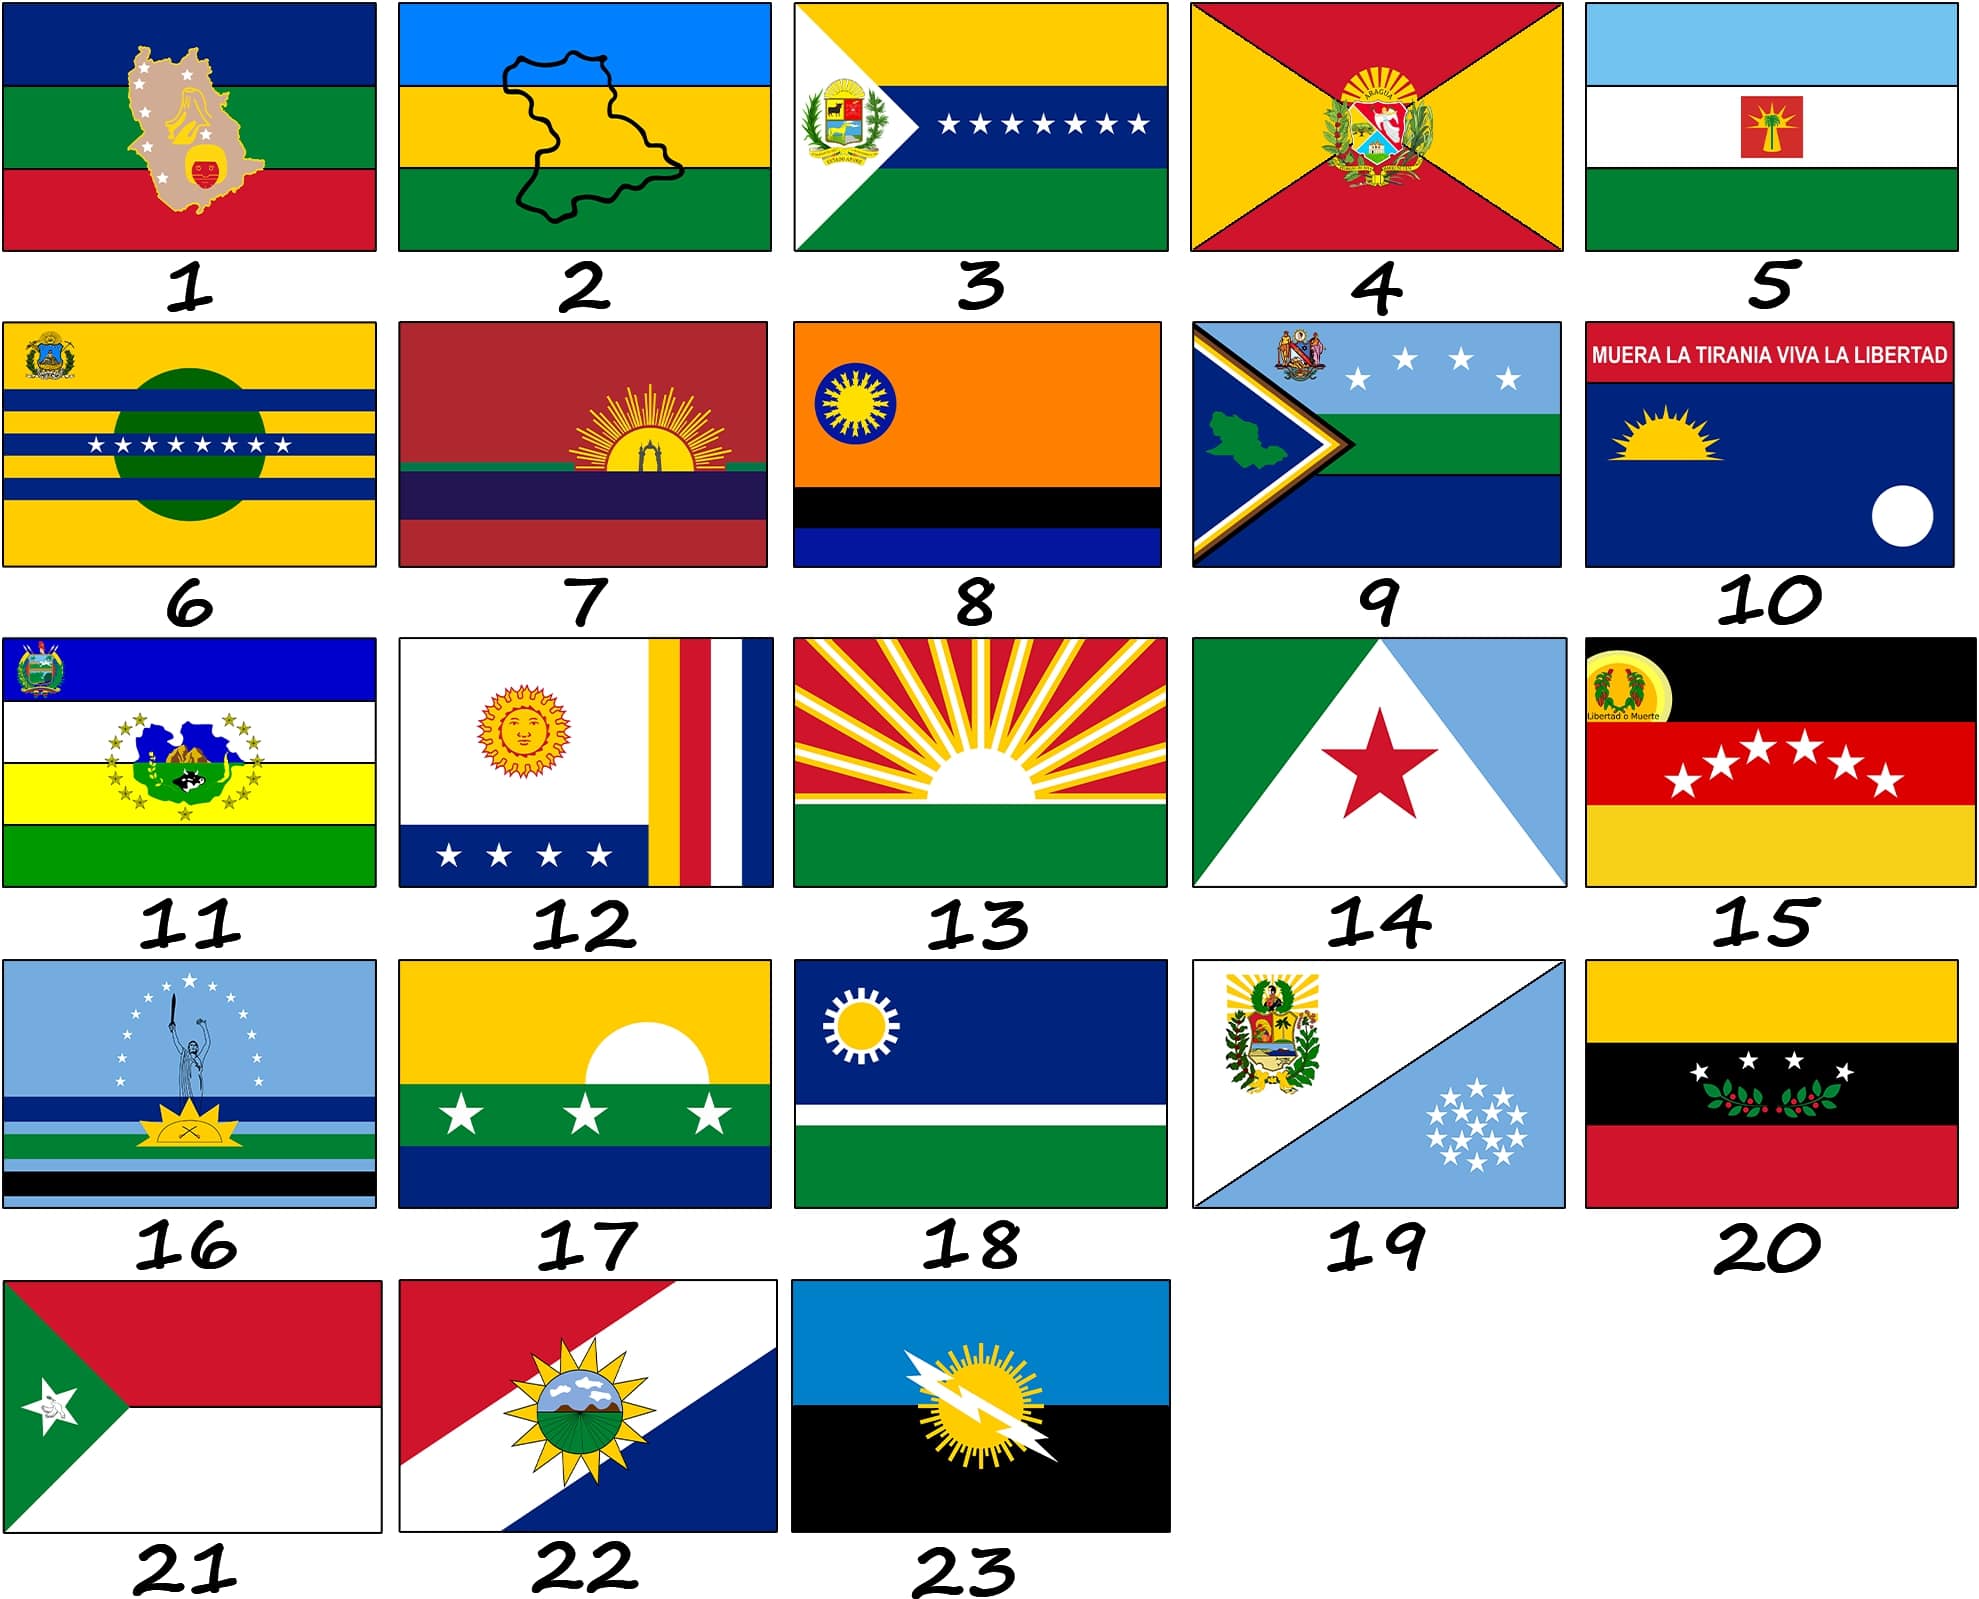 Flags of the states of Venezuela